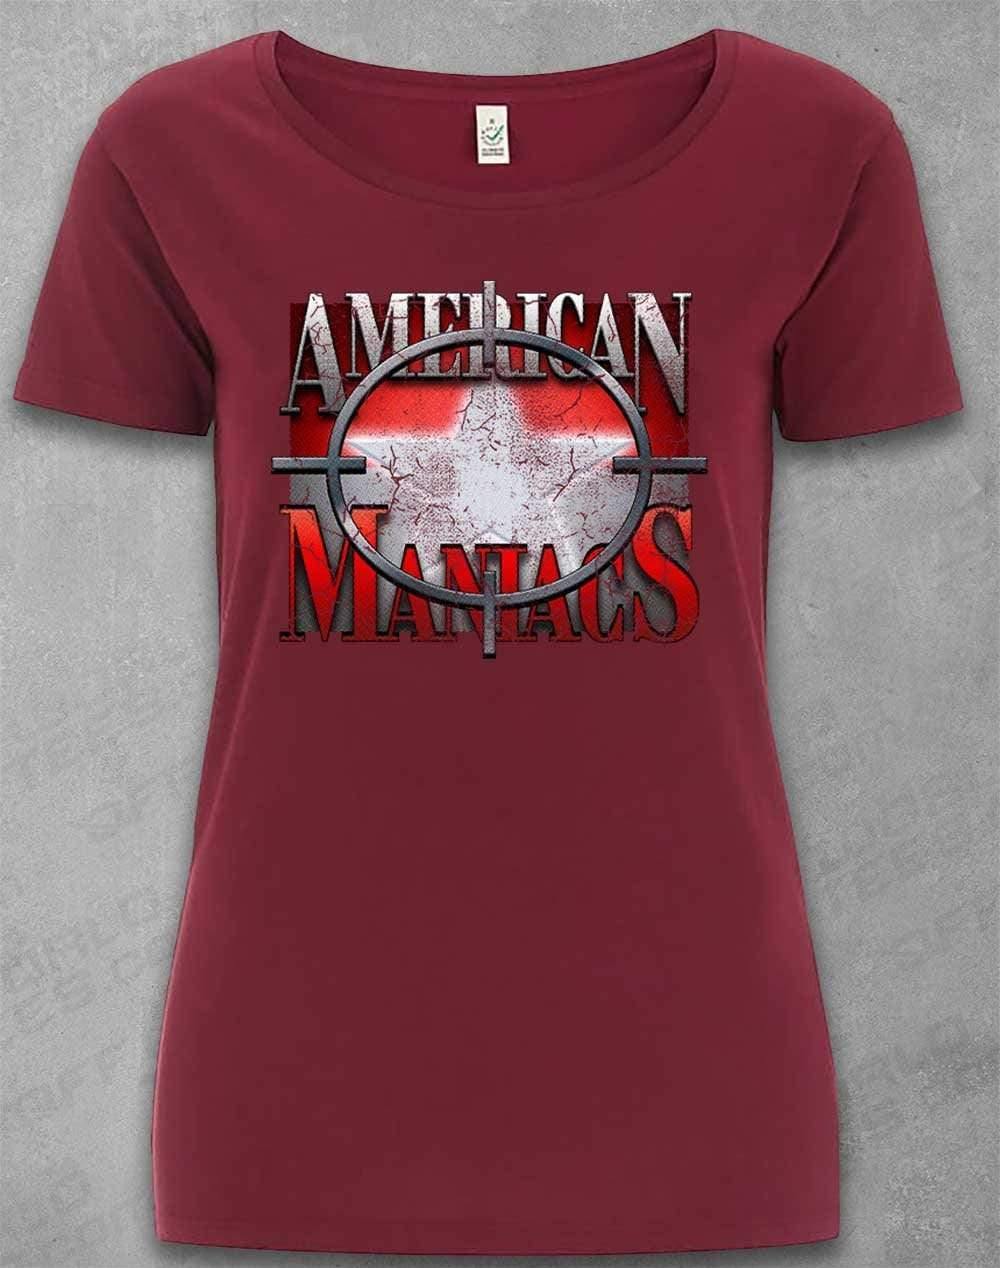 DELUXE American Maniacs - Organic Scoop Neck T-Shirt 8-10 / Burgundy  - Off World Tees